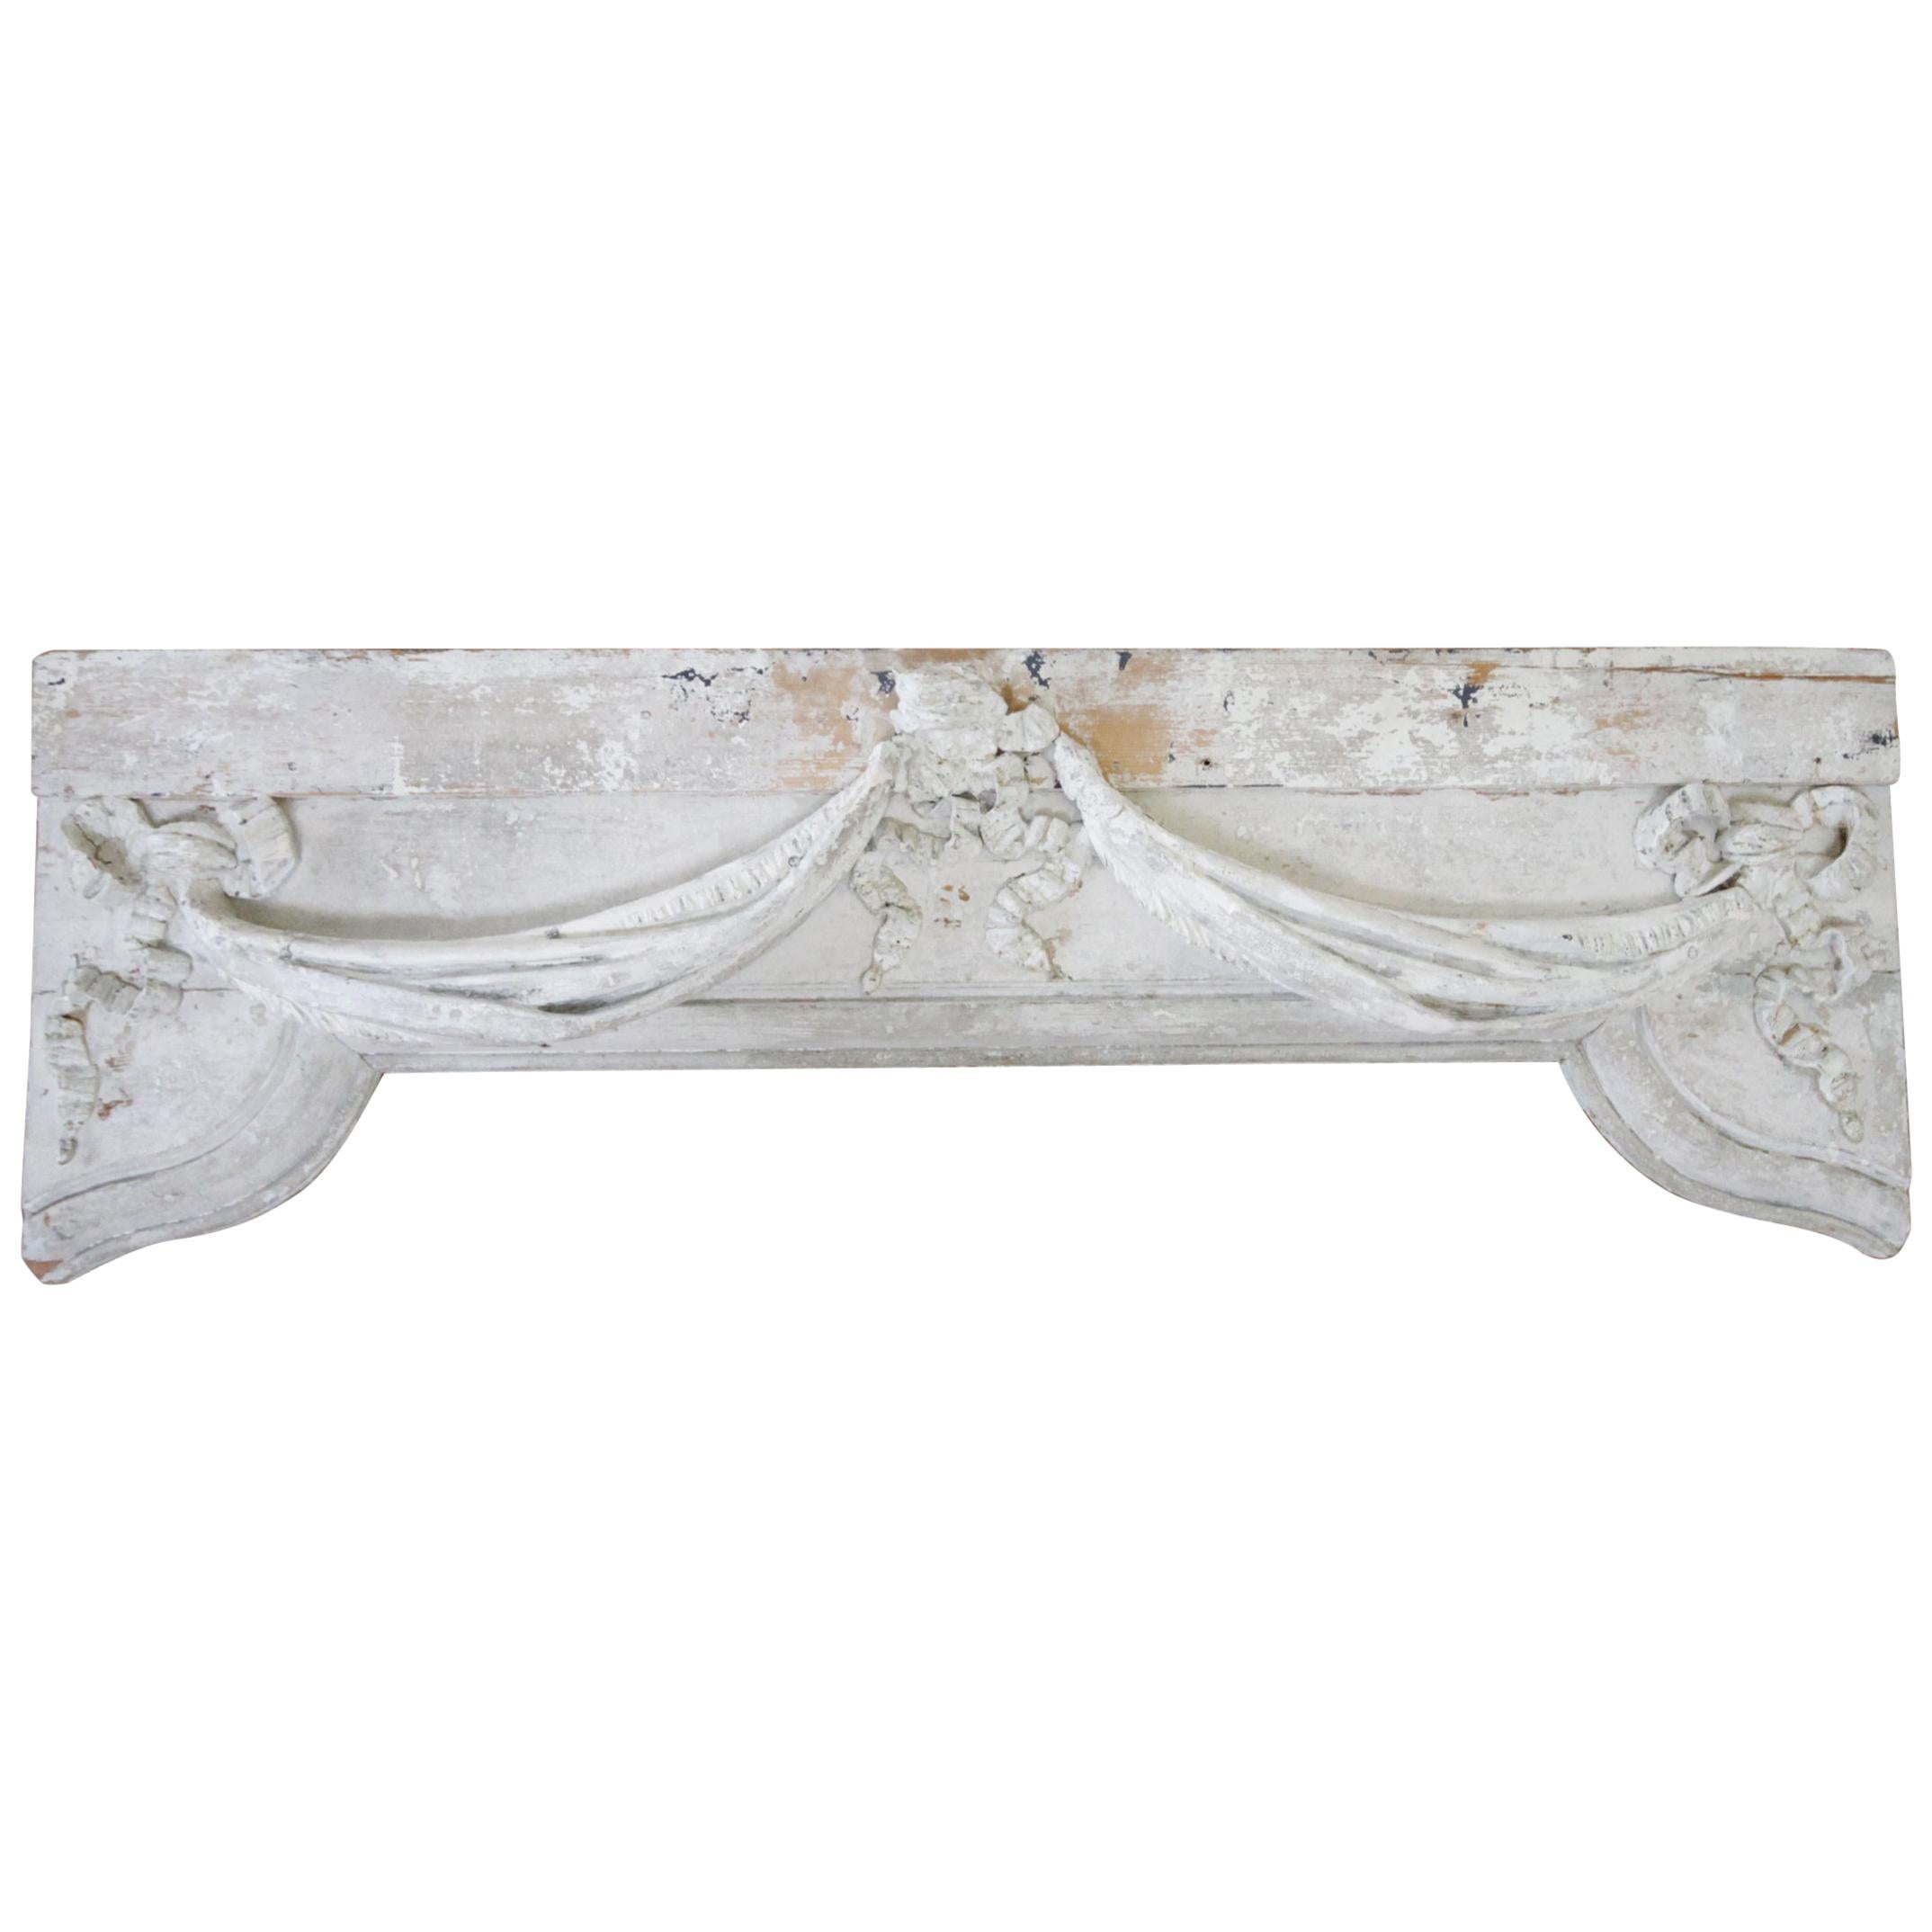 Antique Original Painted Architectural Header with Ribbon Swag